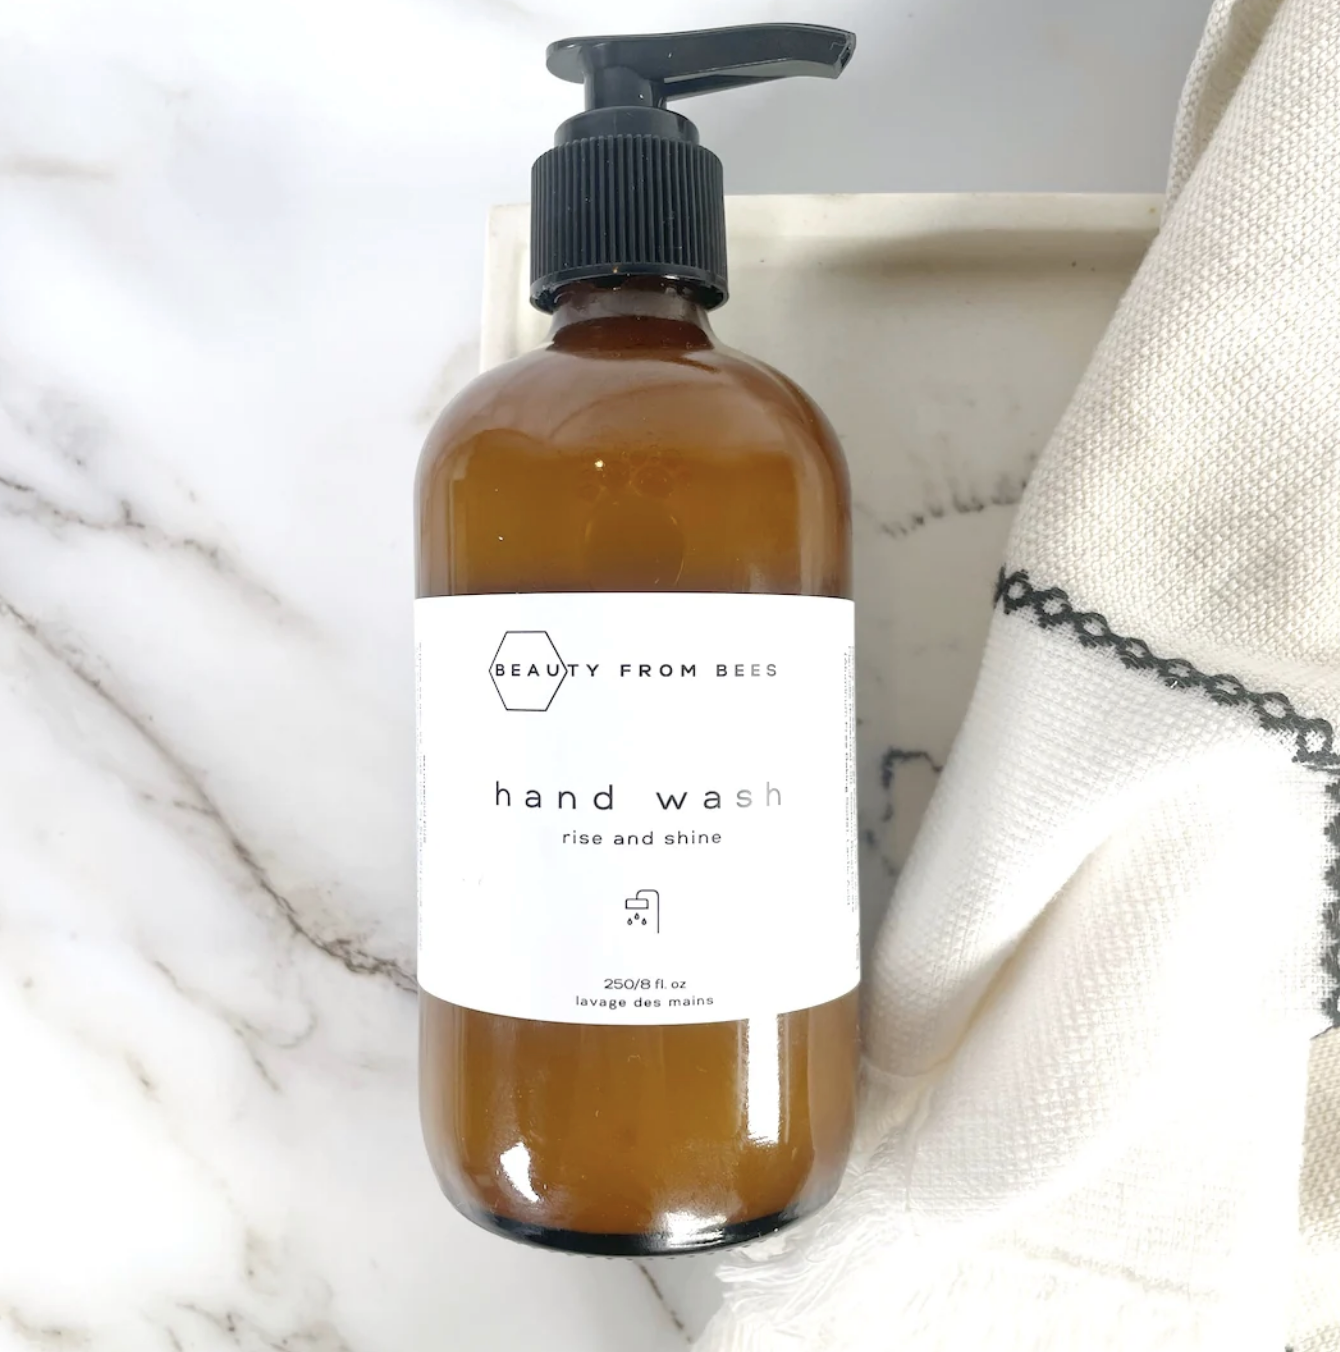 Hand Wash - Beauty From Bees